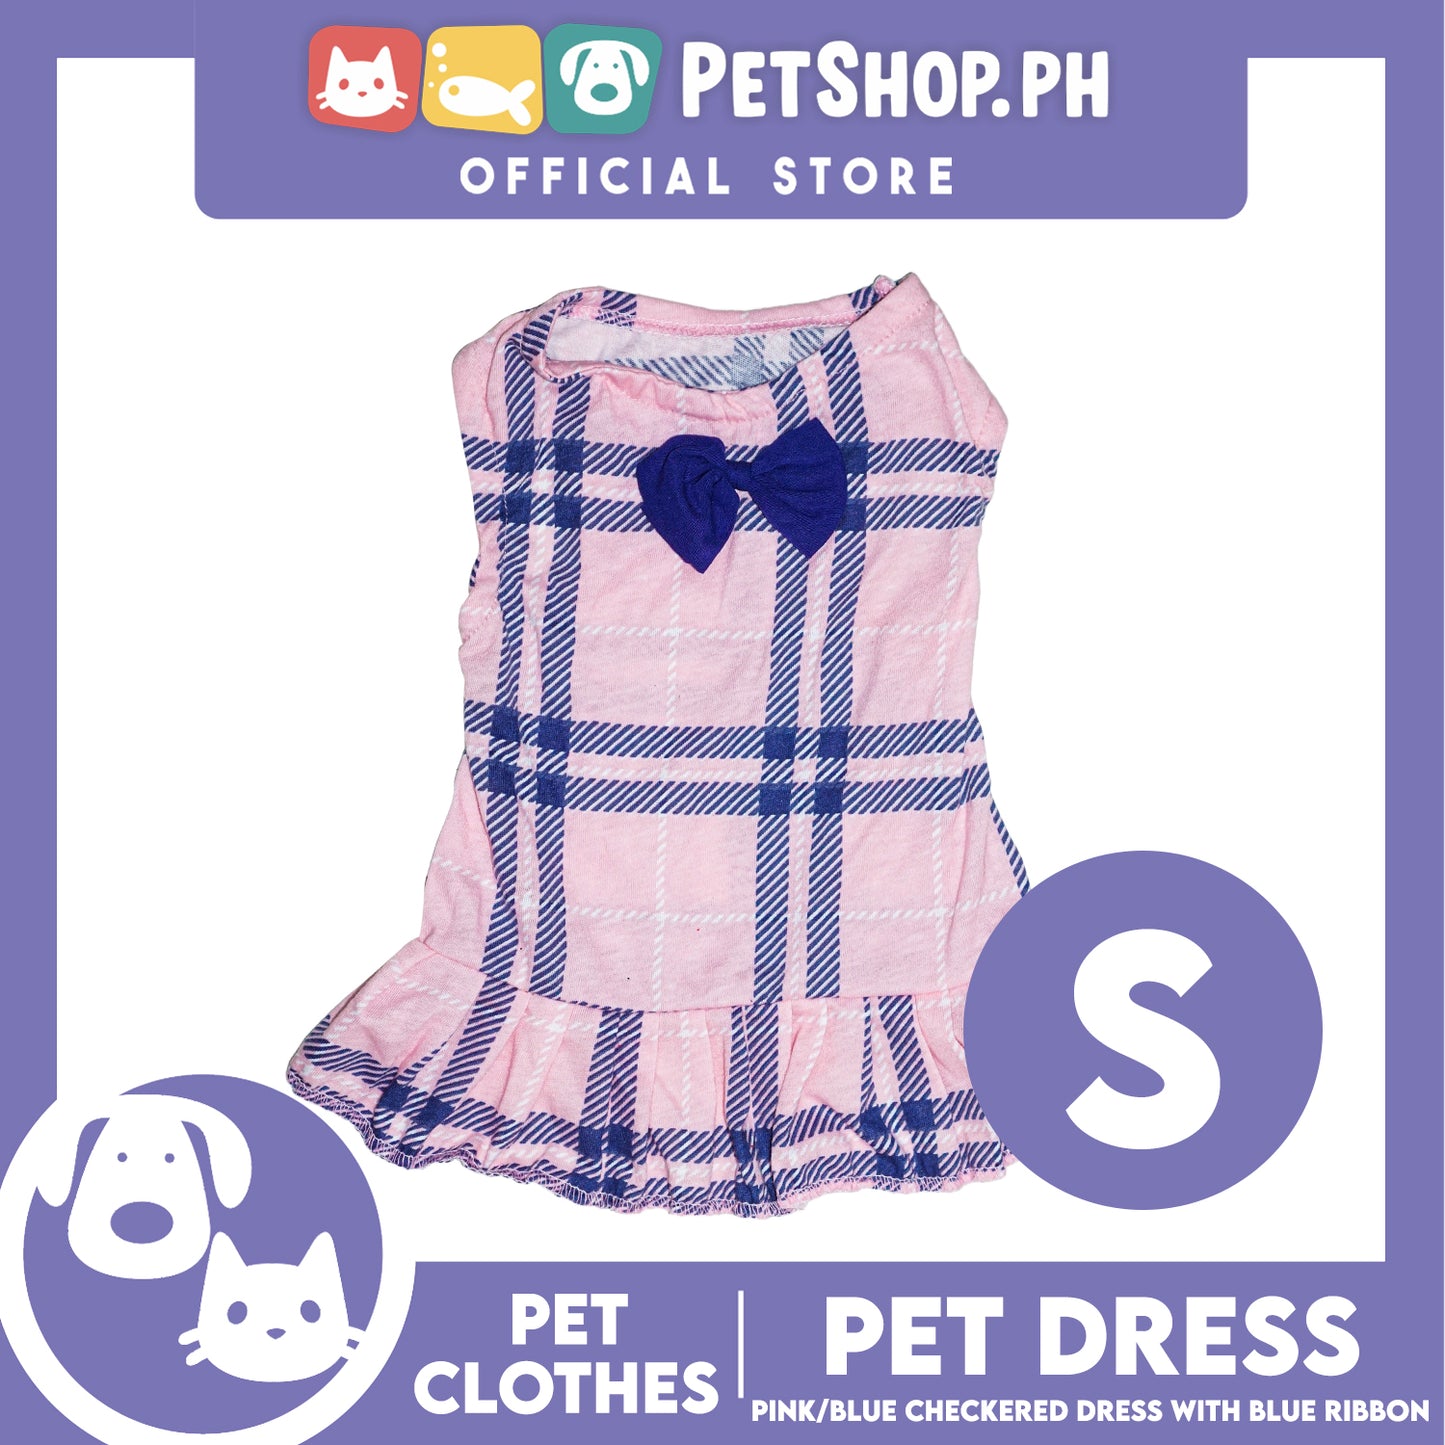 Pet Dress Pink/Blue Checkered Dress with Blue Ribbon (Small) Perfect Fit for Dogs and Cats